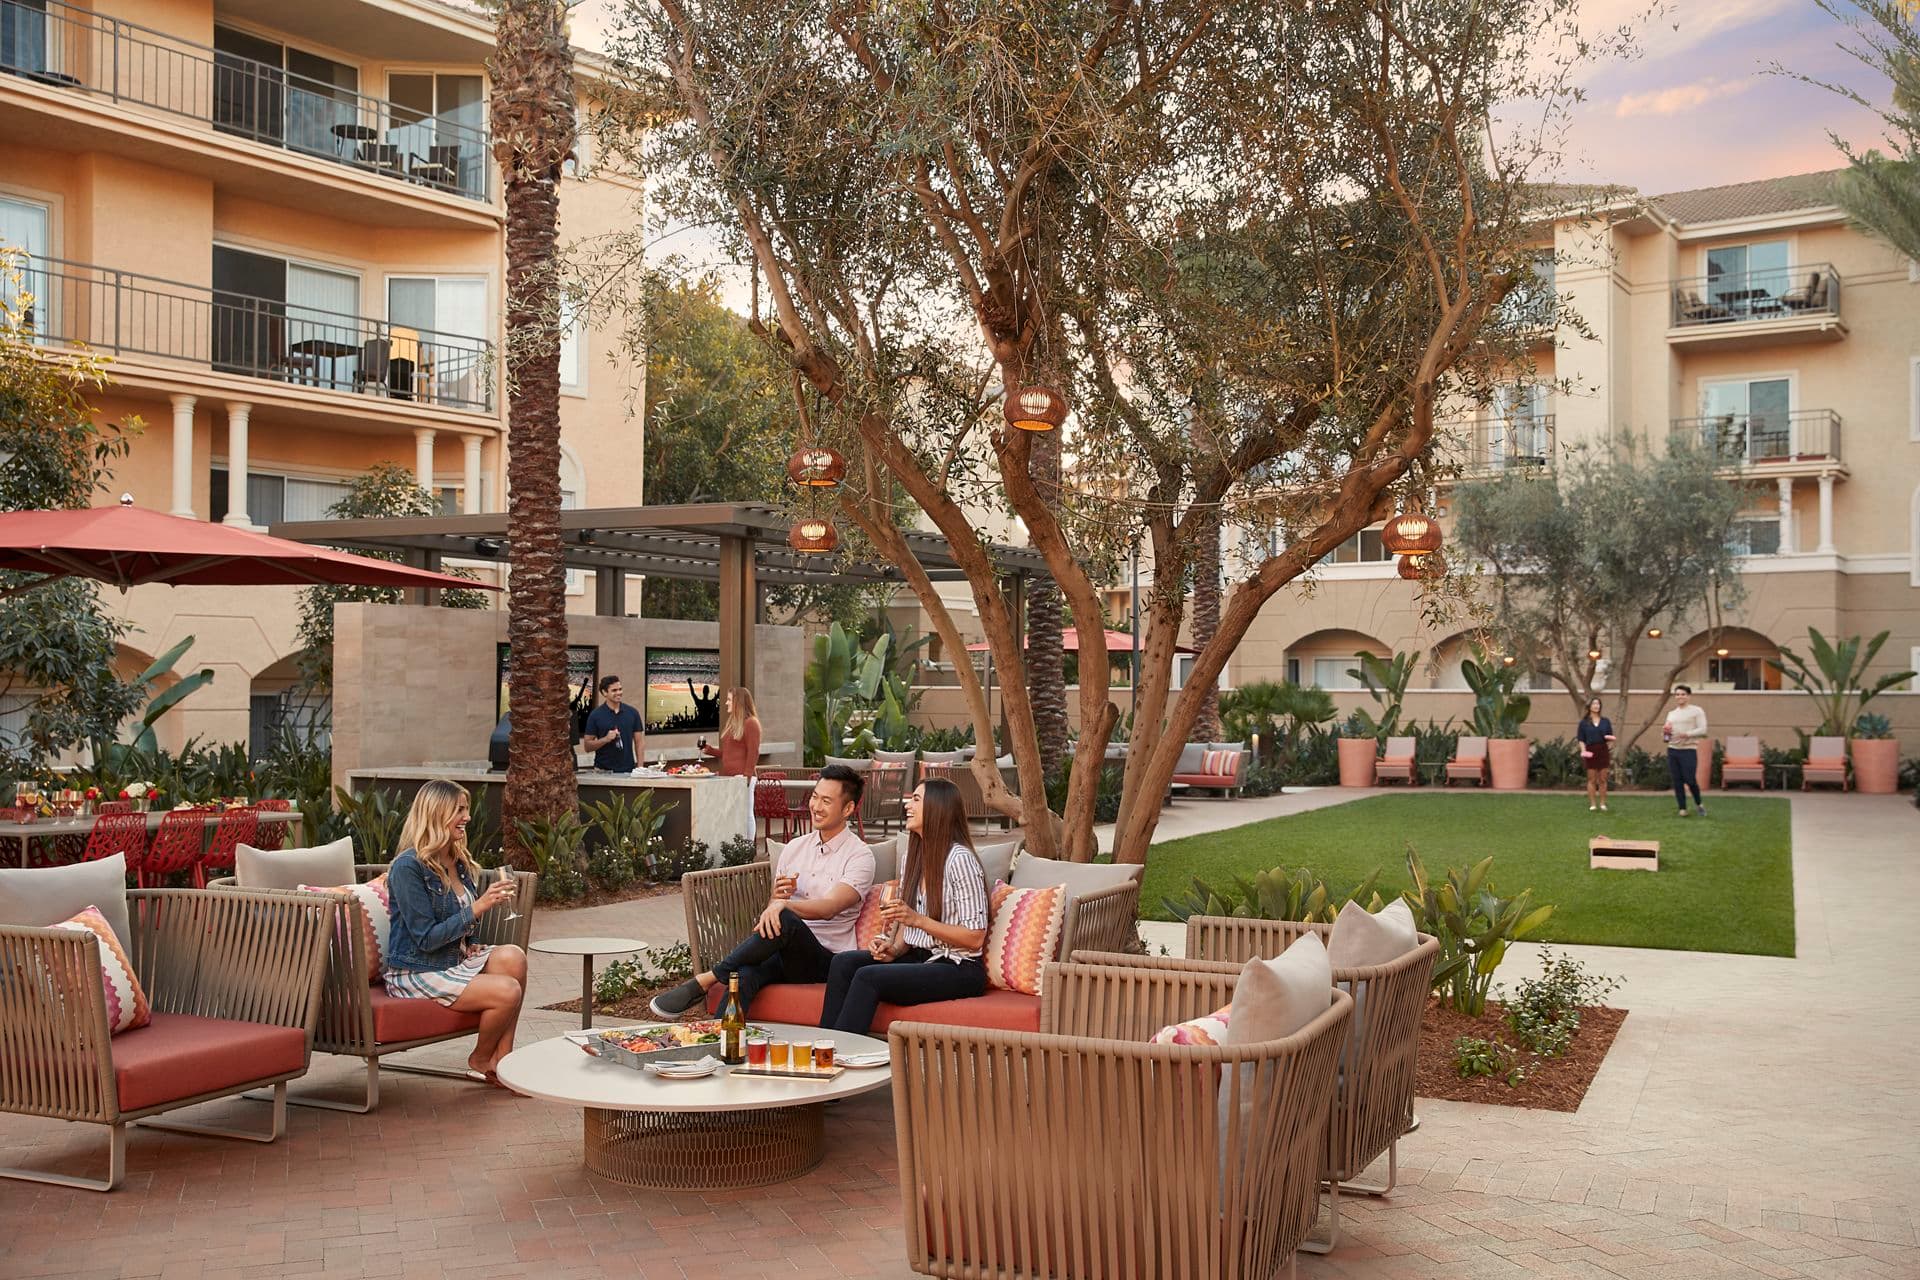 Exterior view of people spending time in lounge courtyard at The Villas of Renaissance Apartment Homes in San Diego, CA.